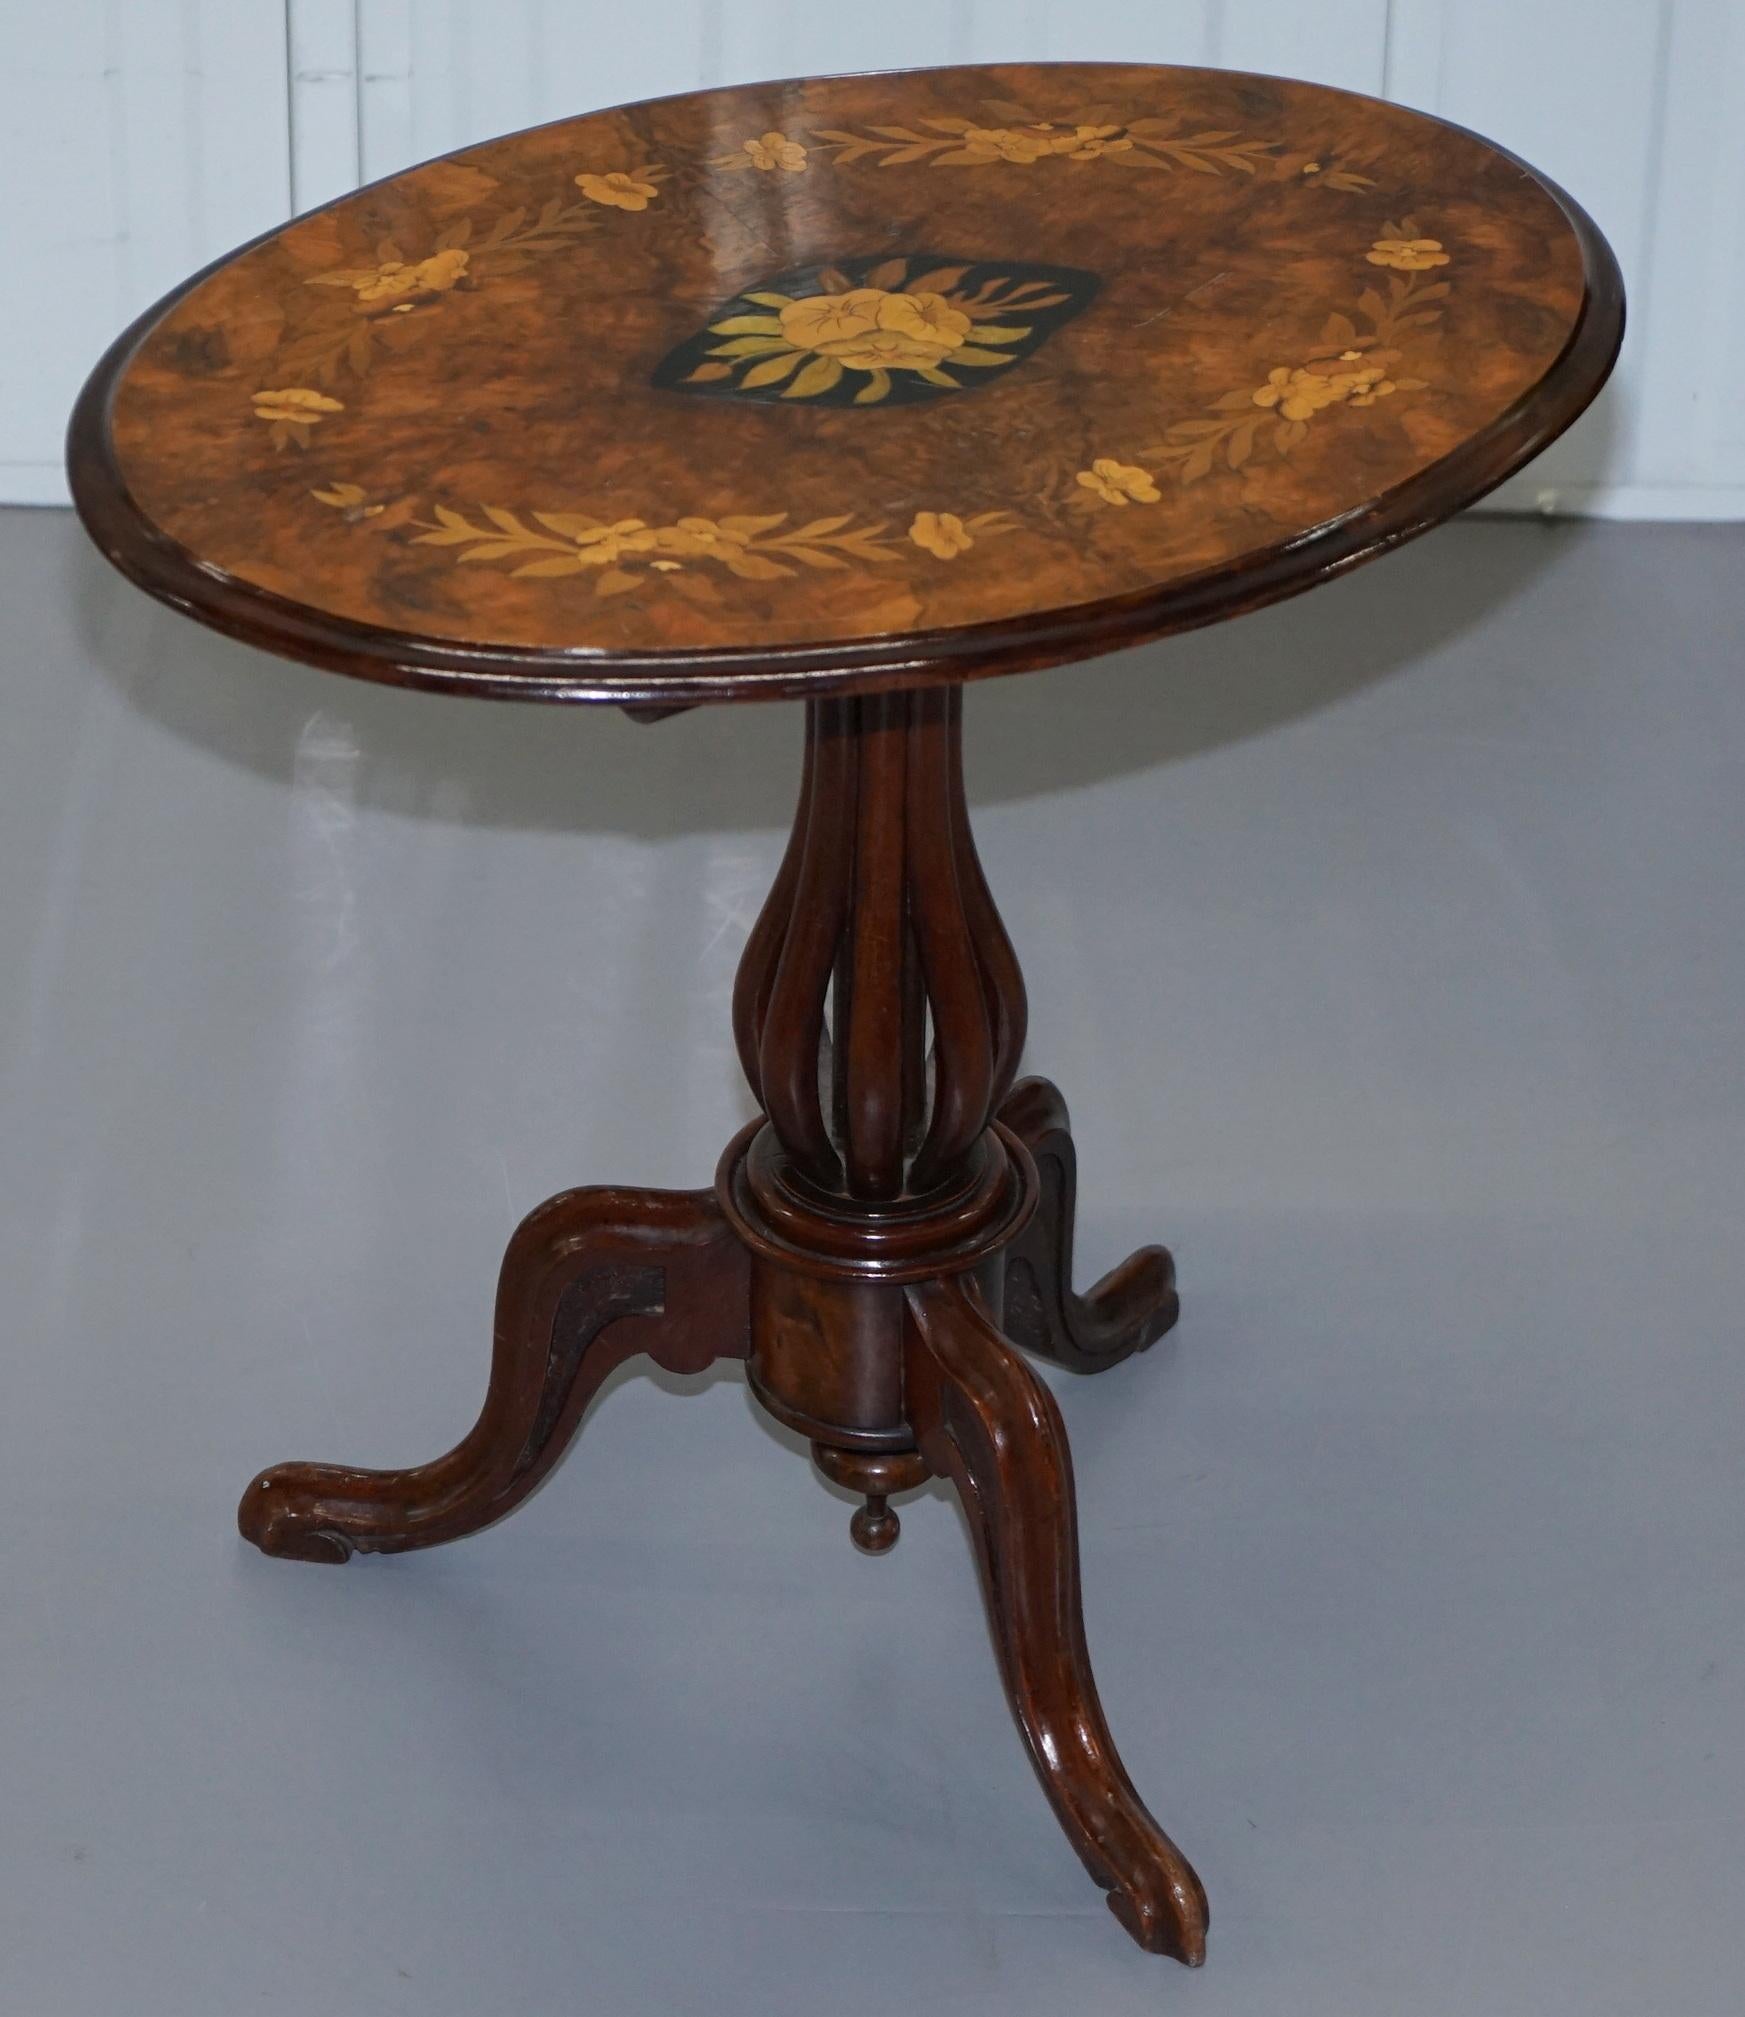 We are delighted to offer for sale this stunning Victorian Walnut marquetry inlaid tilt top side table with bulbus base

A good looking and functional table, its very decorative, I love furniture like this because you can leave the top tilted